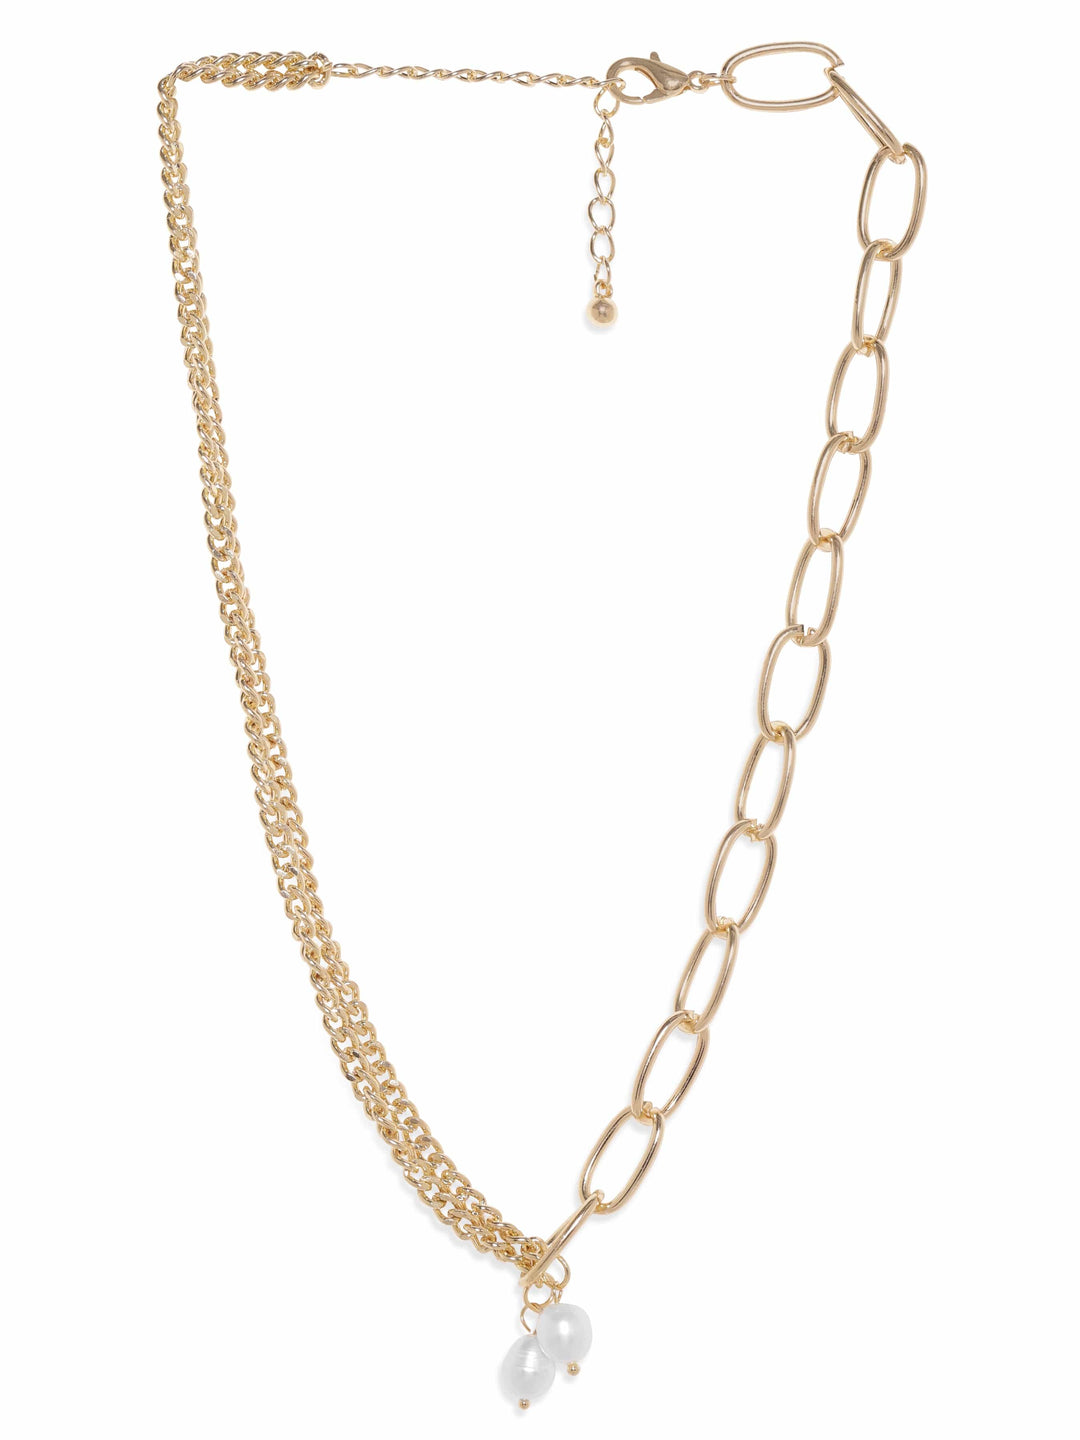 Rubans Voguish 22K Gold Plated Link Chain Multilayer Copper Necklace Necklace